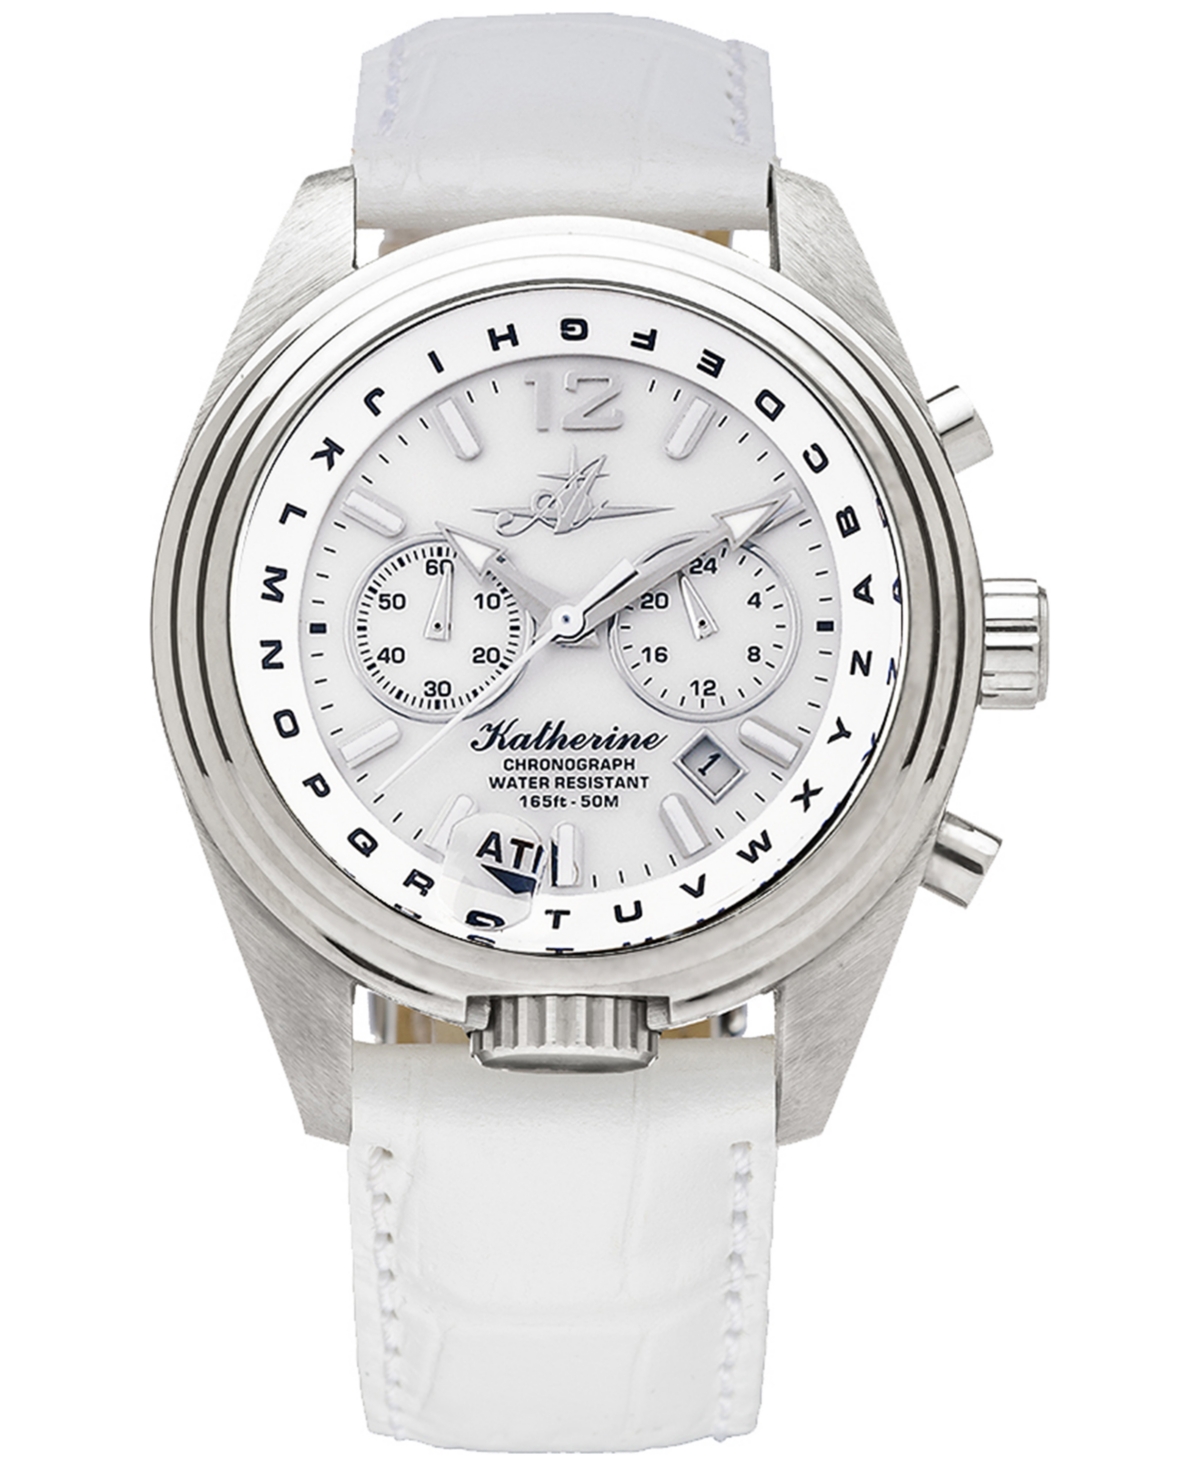 Women's Katherine Chronograph White Leather Strap Steel Watch 40mm - Pearl White